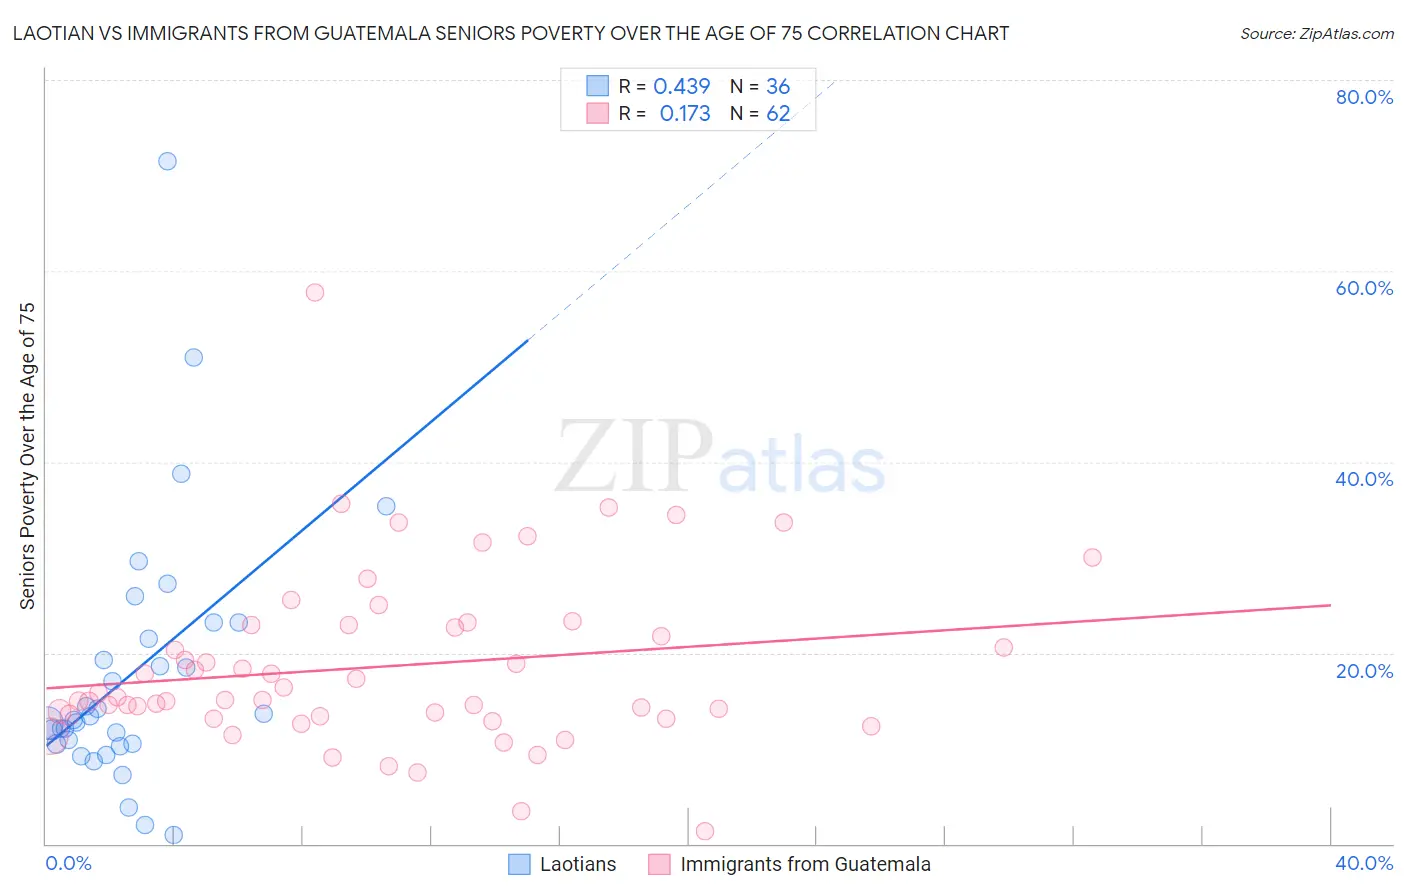 Laotian vs Immigrants from Guatemala Seniors Poverty Over the Age of 75